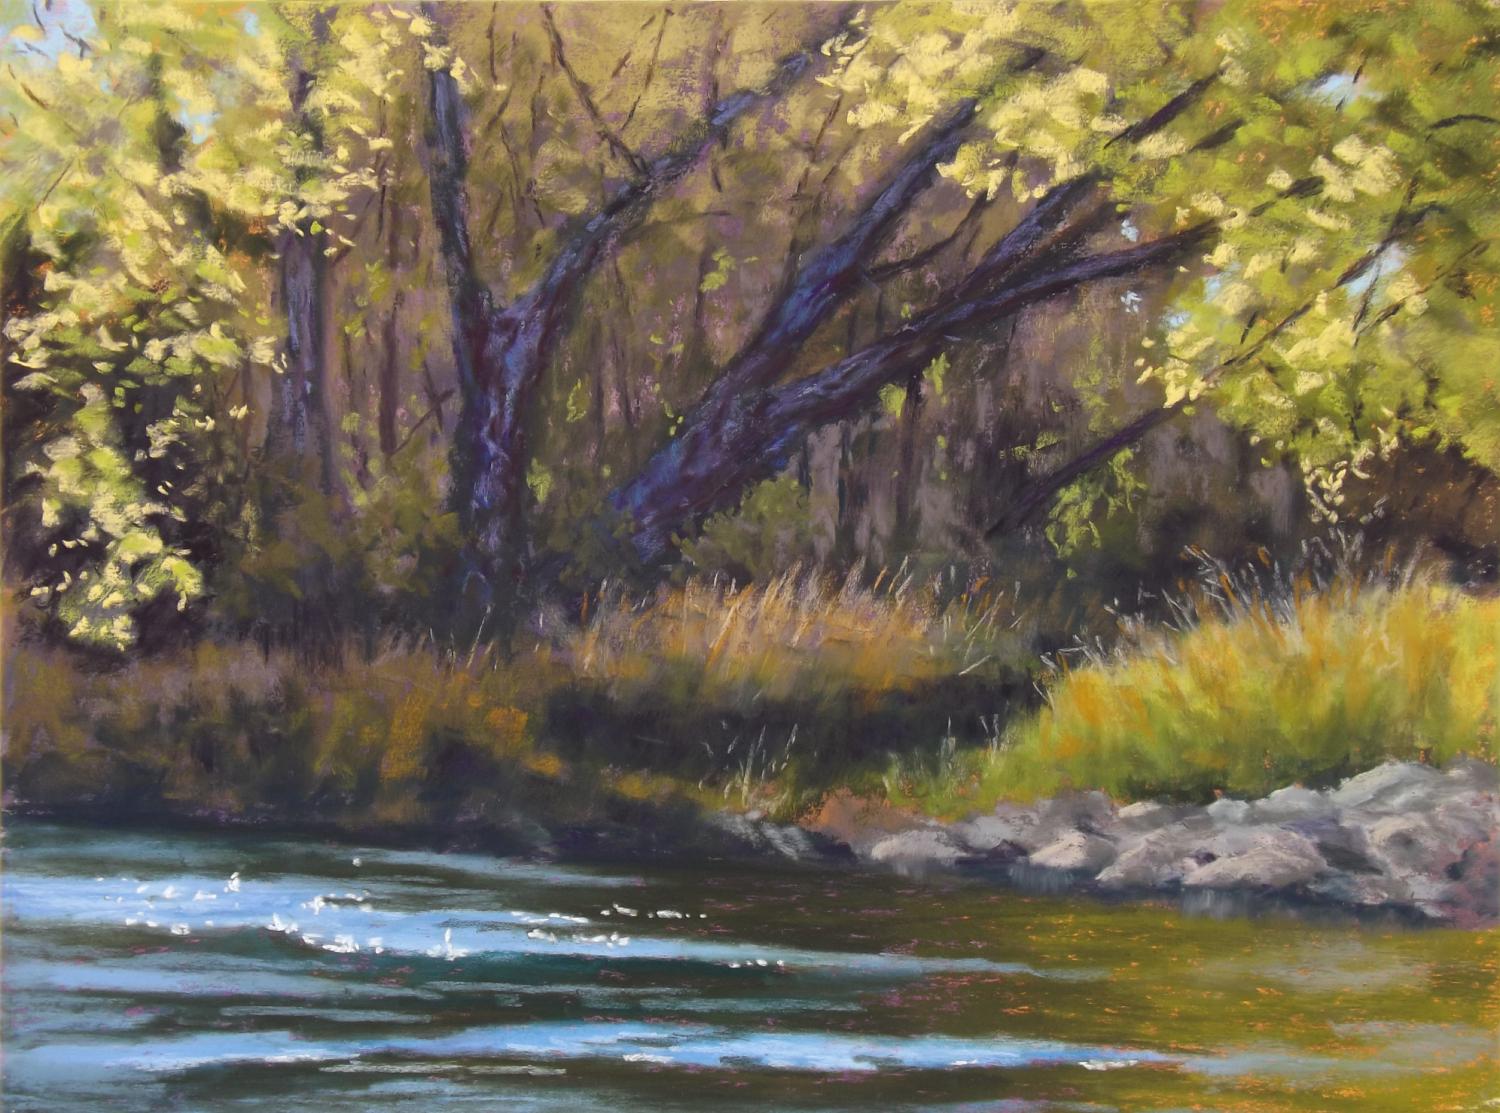 At the Edge of the Stream, Original Painting